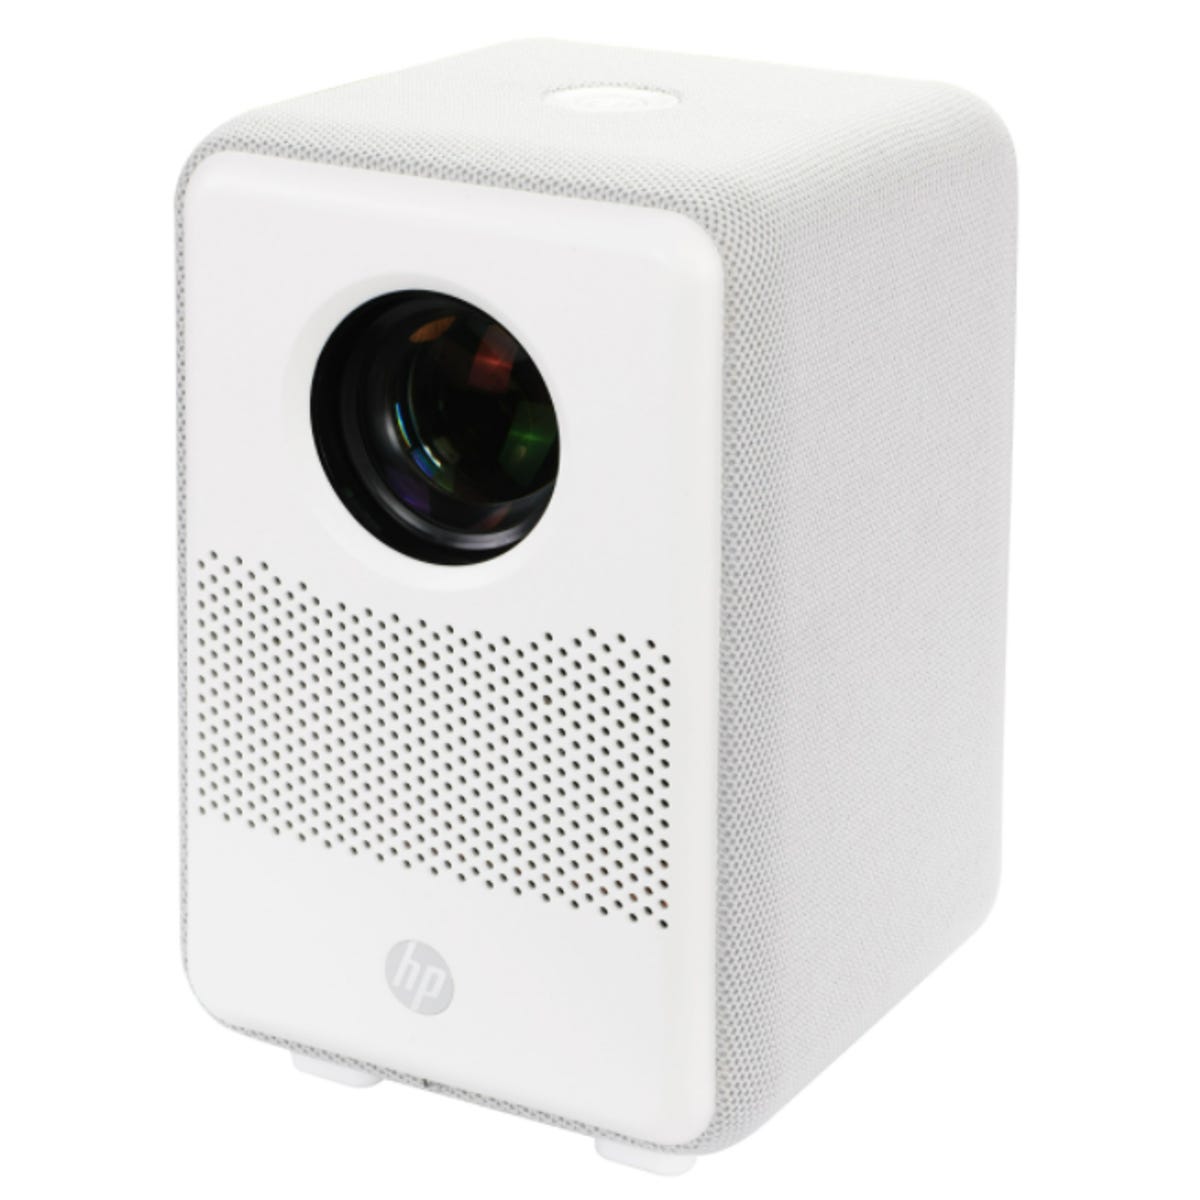 HP CC200 projector review: Compact, embedded speakers, and simple 